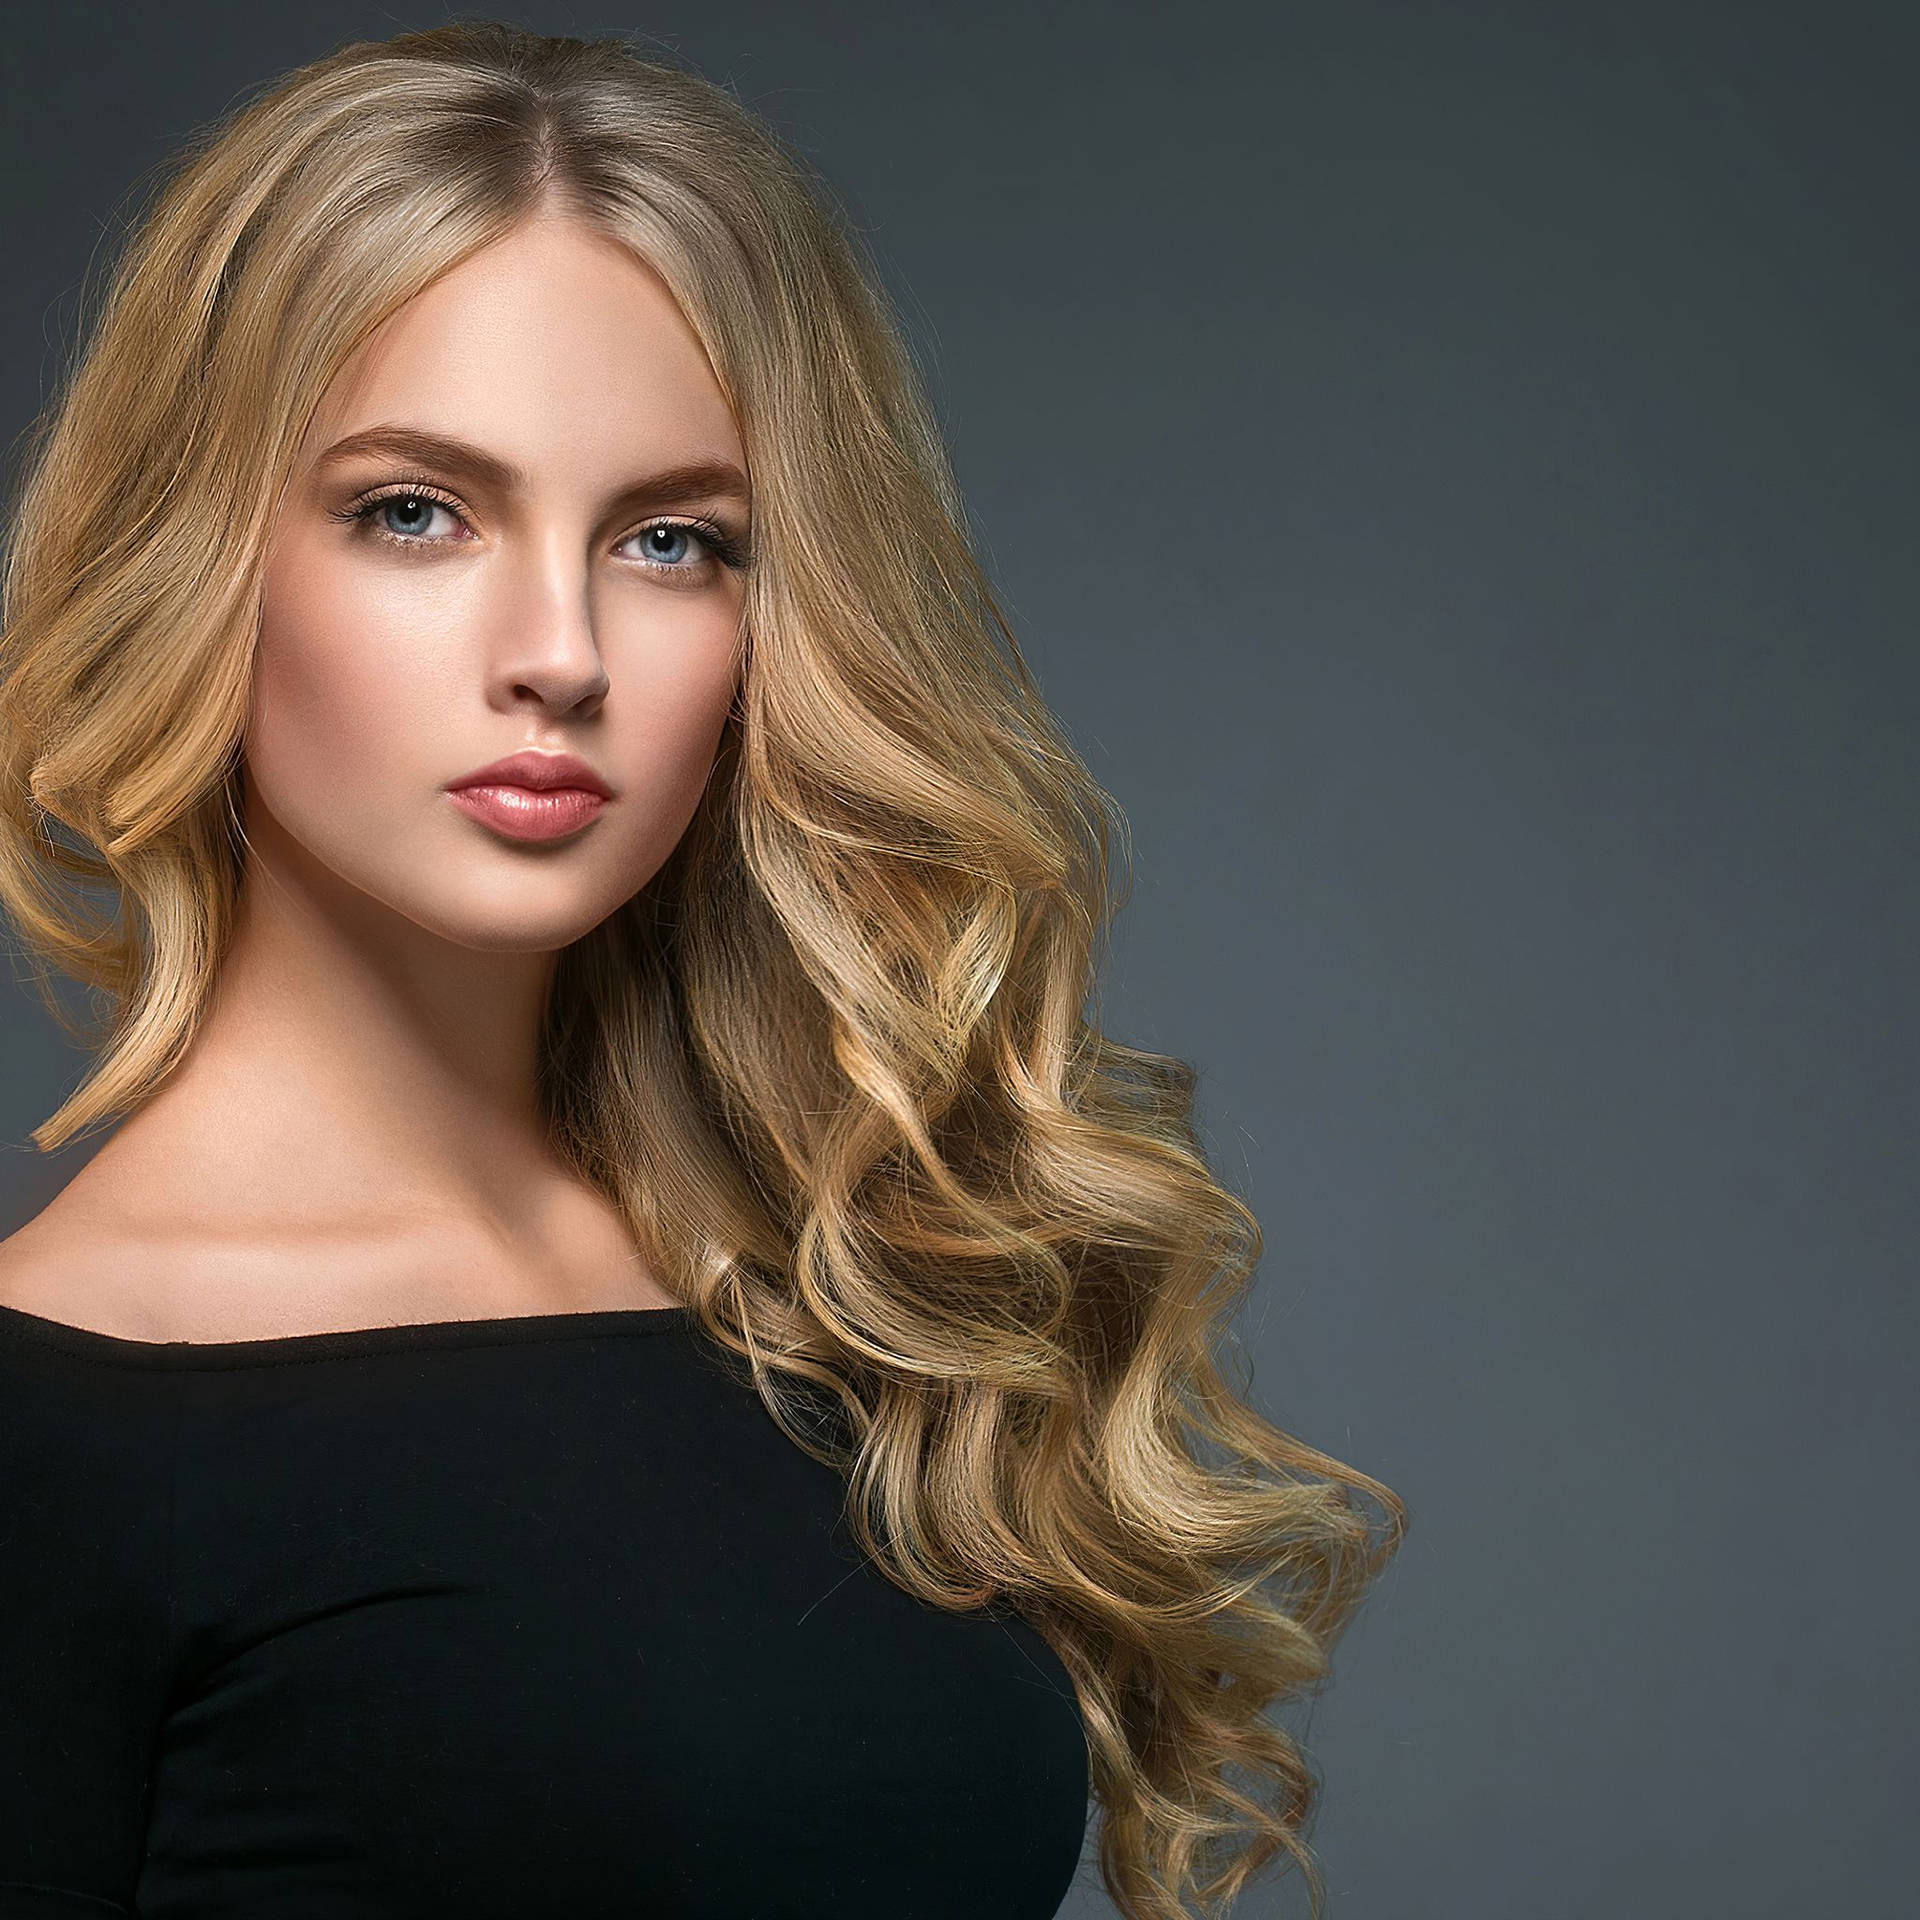 Blonde Woman For Salon Advertising Background